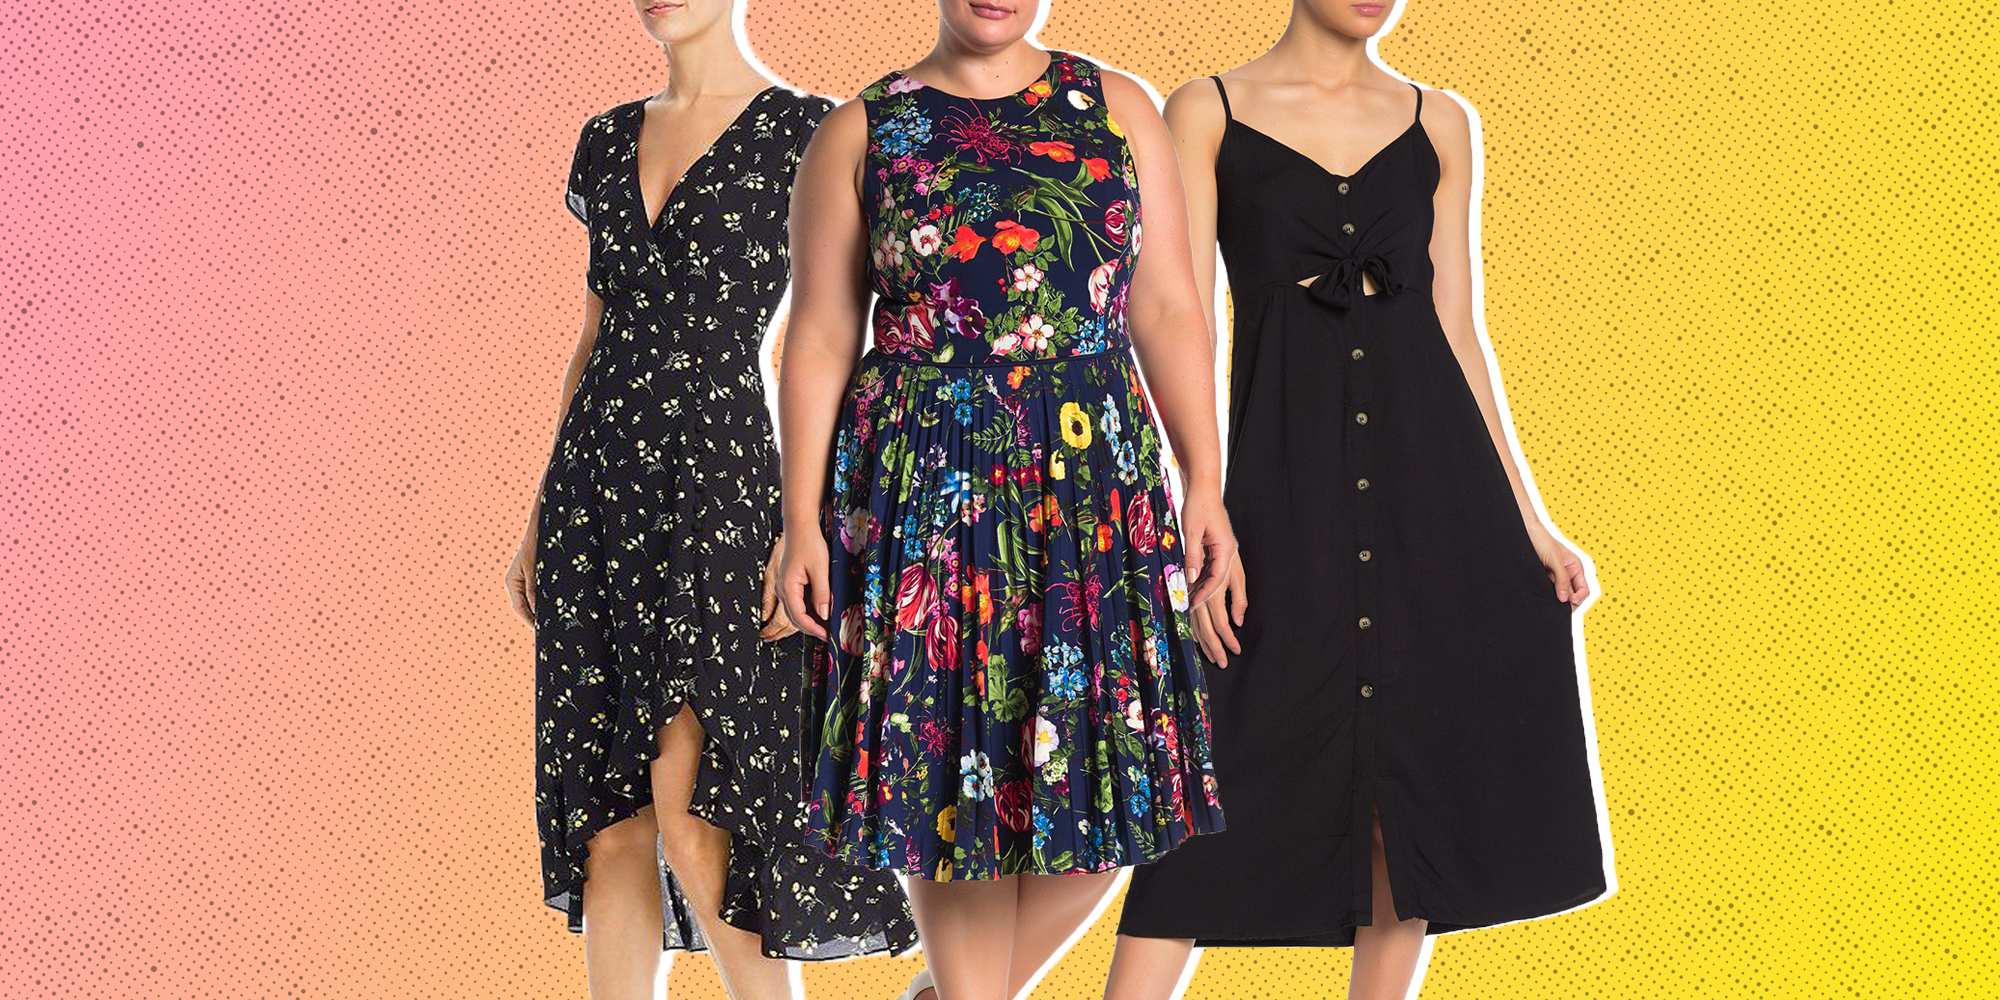 slimming dresses to wear to a wedding